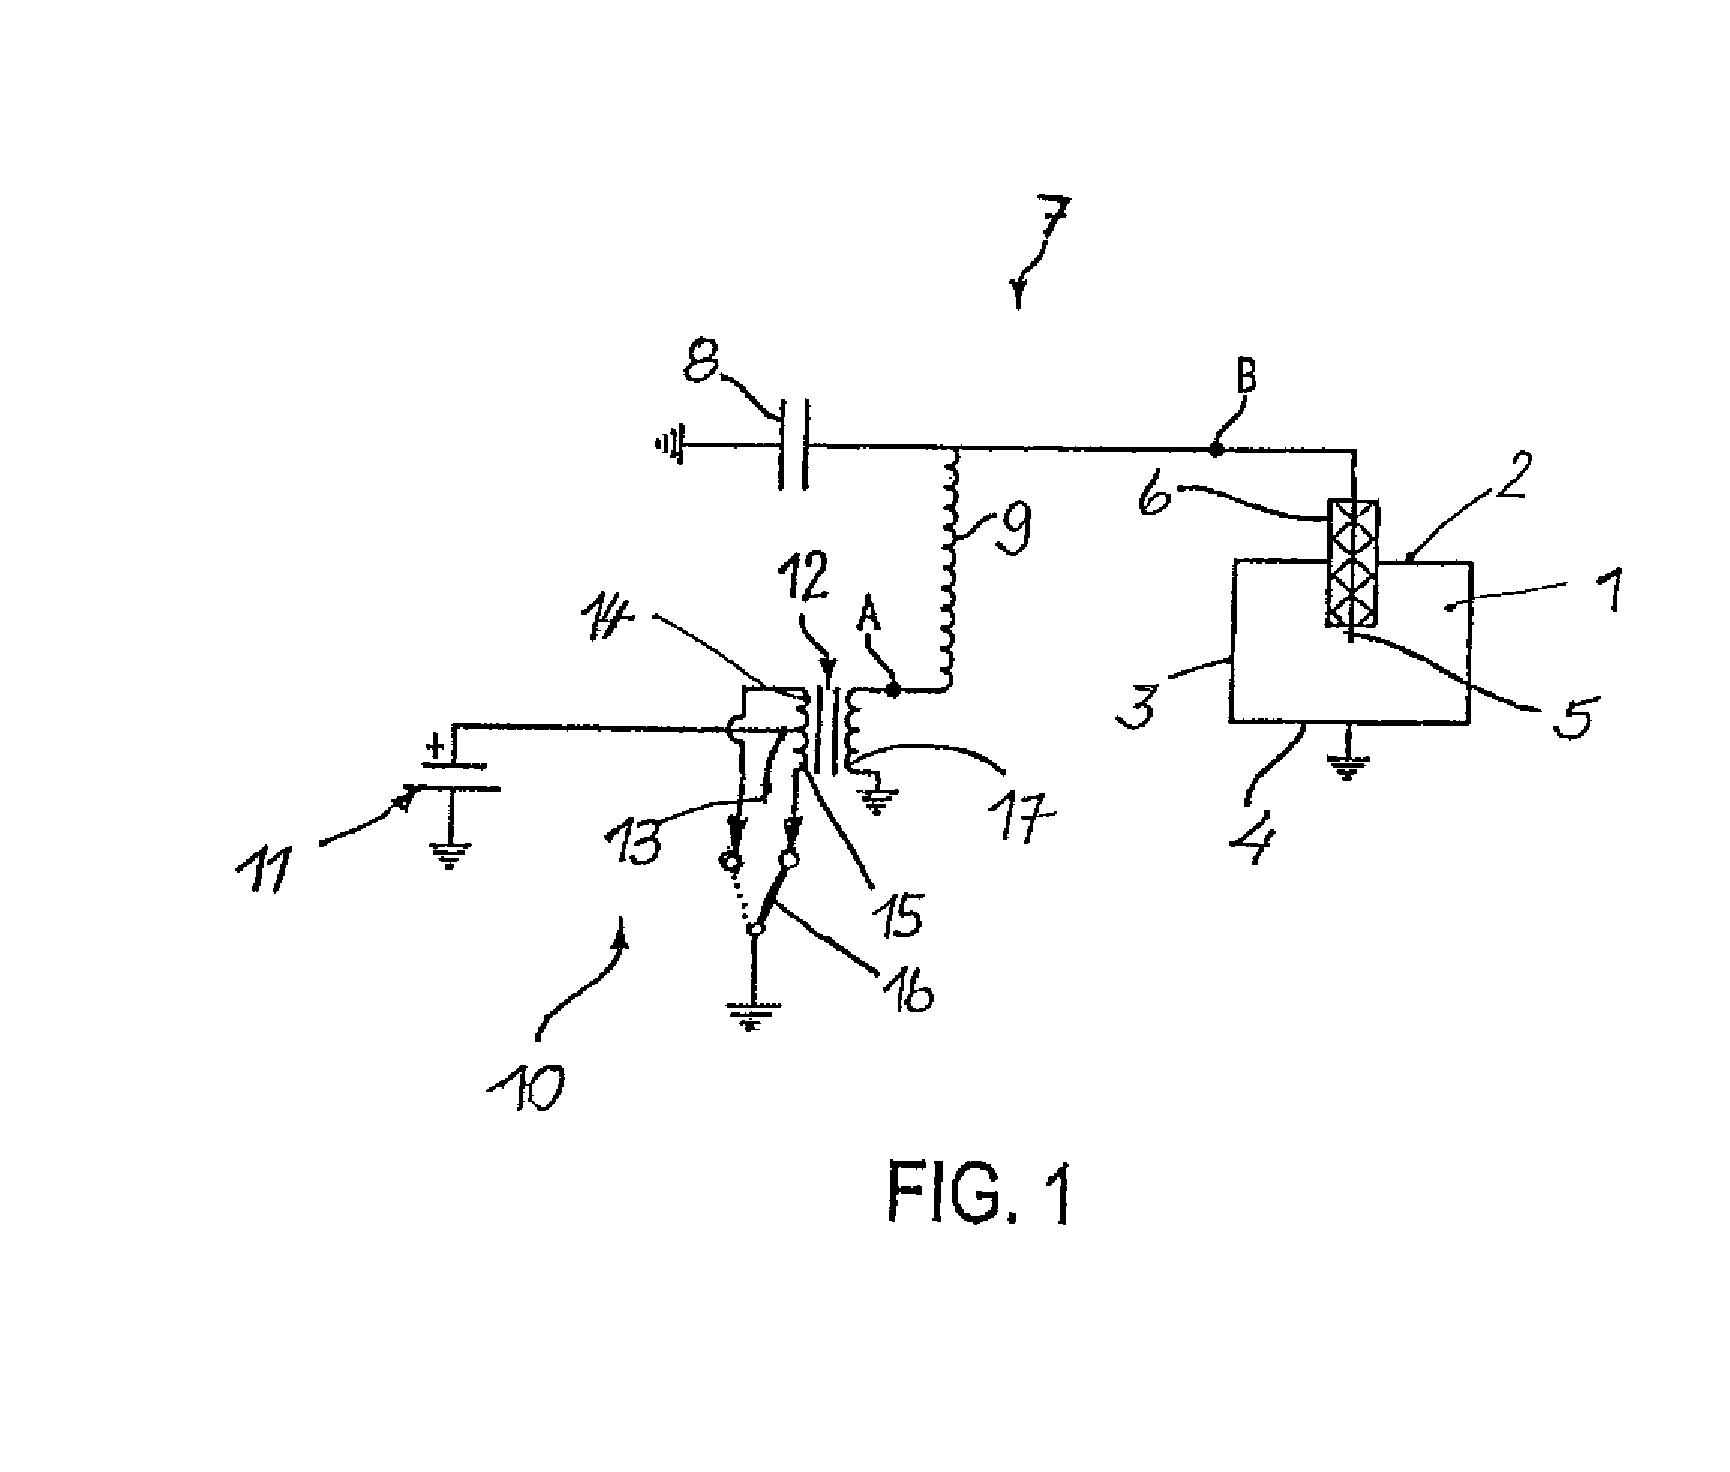 Method for Igniting a Fuel-Air Mixture of a Combustion Chamber, Particularly in an Internal Combustion Engine by Generating a Corona Discharge